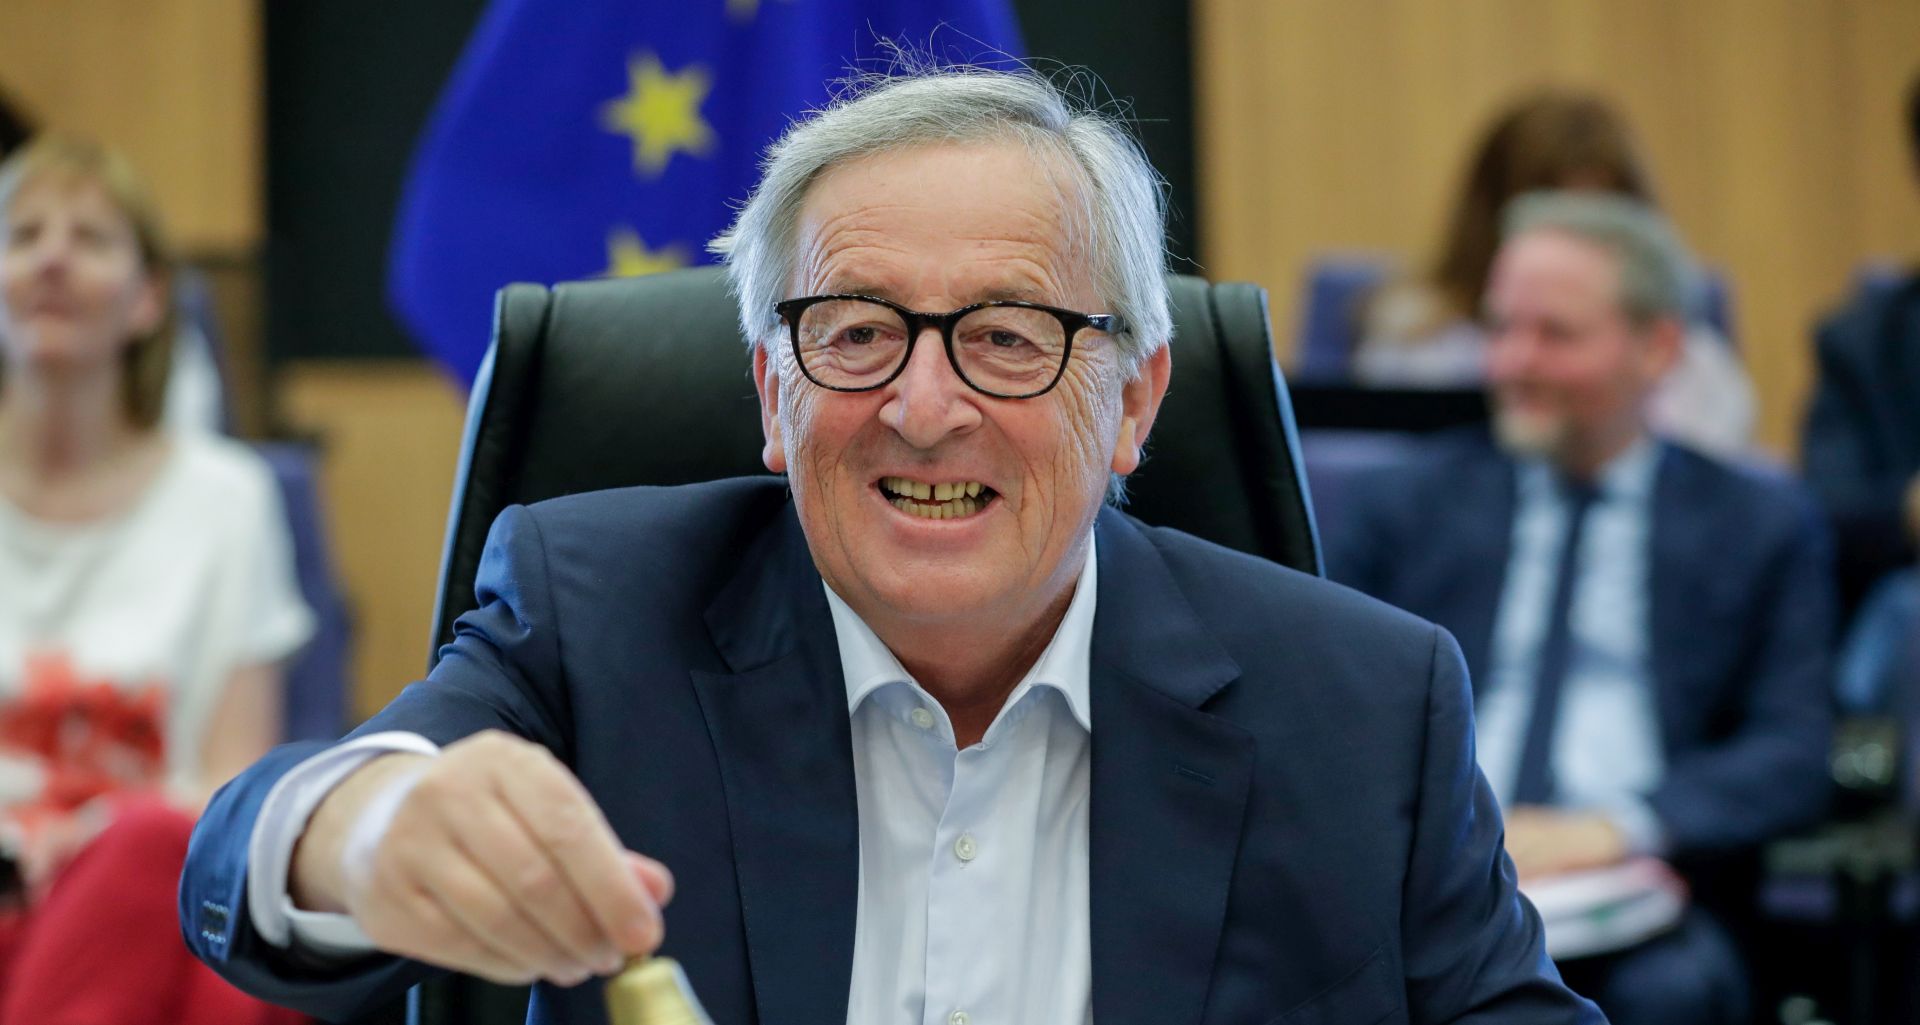 epa07736632 European Commission President Jean-Claude Juncker rings the bell at the start of a weekly college meeting at the EU headquarters in Brussels, Belgium, 24 July 2019.  EPA/STEPHANIE LECOCQ